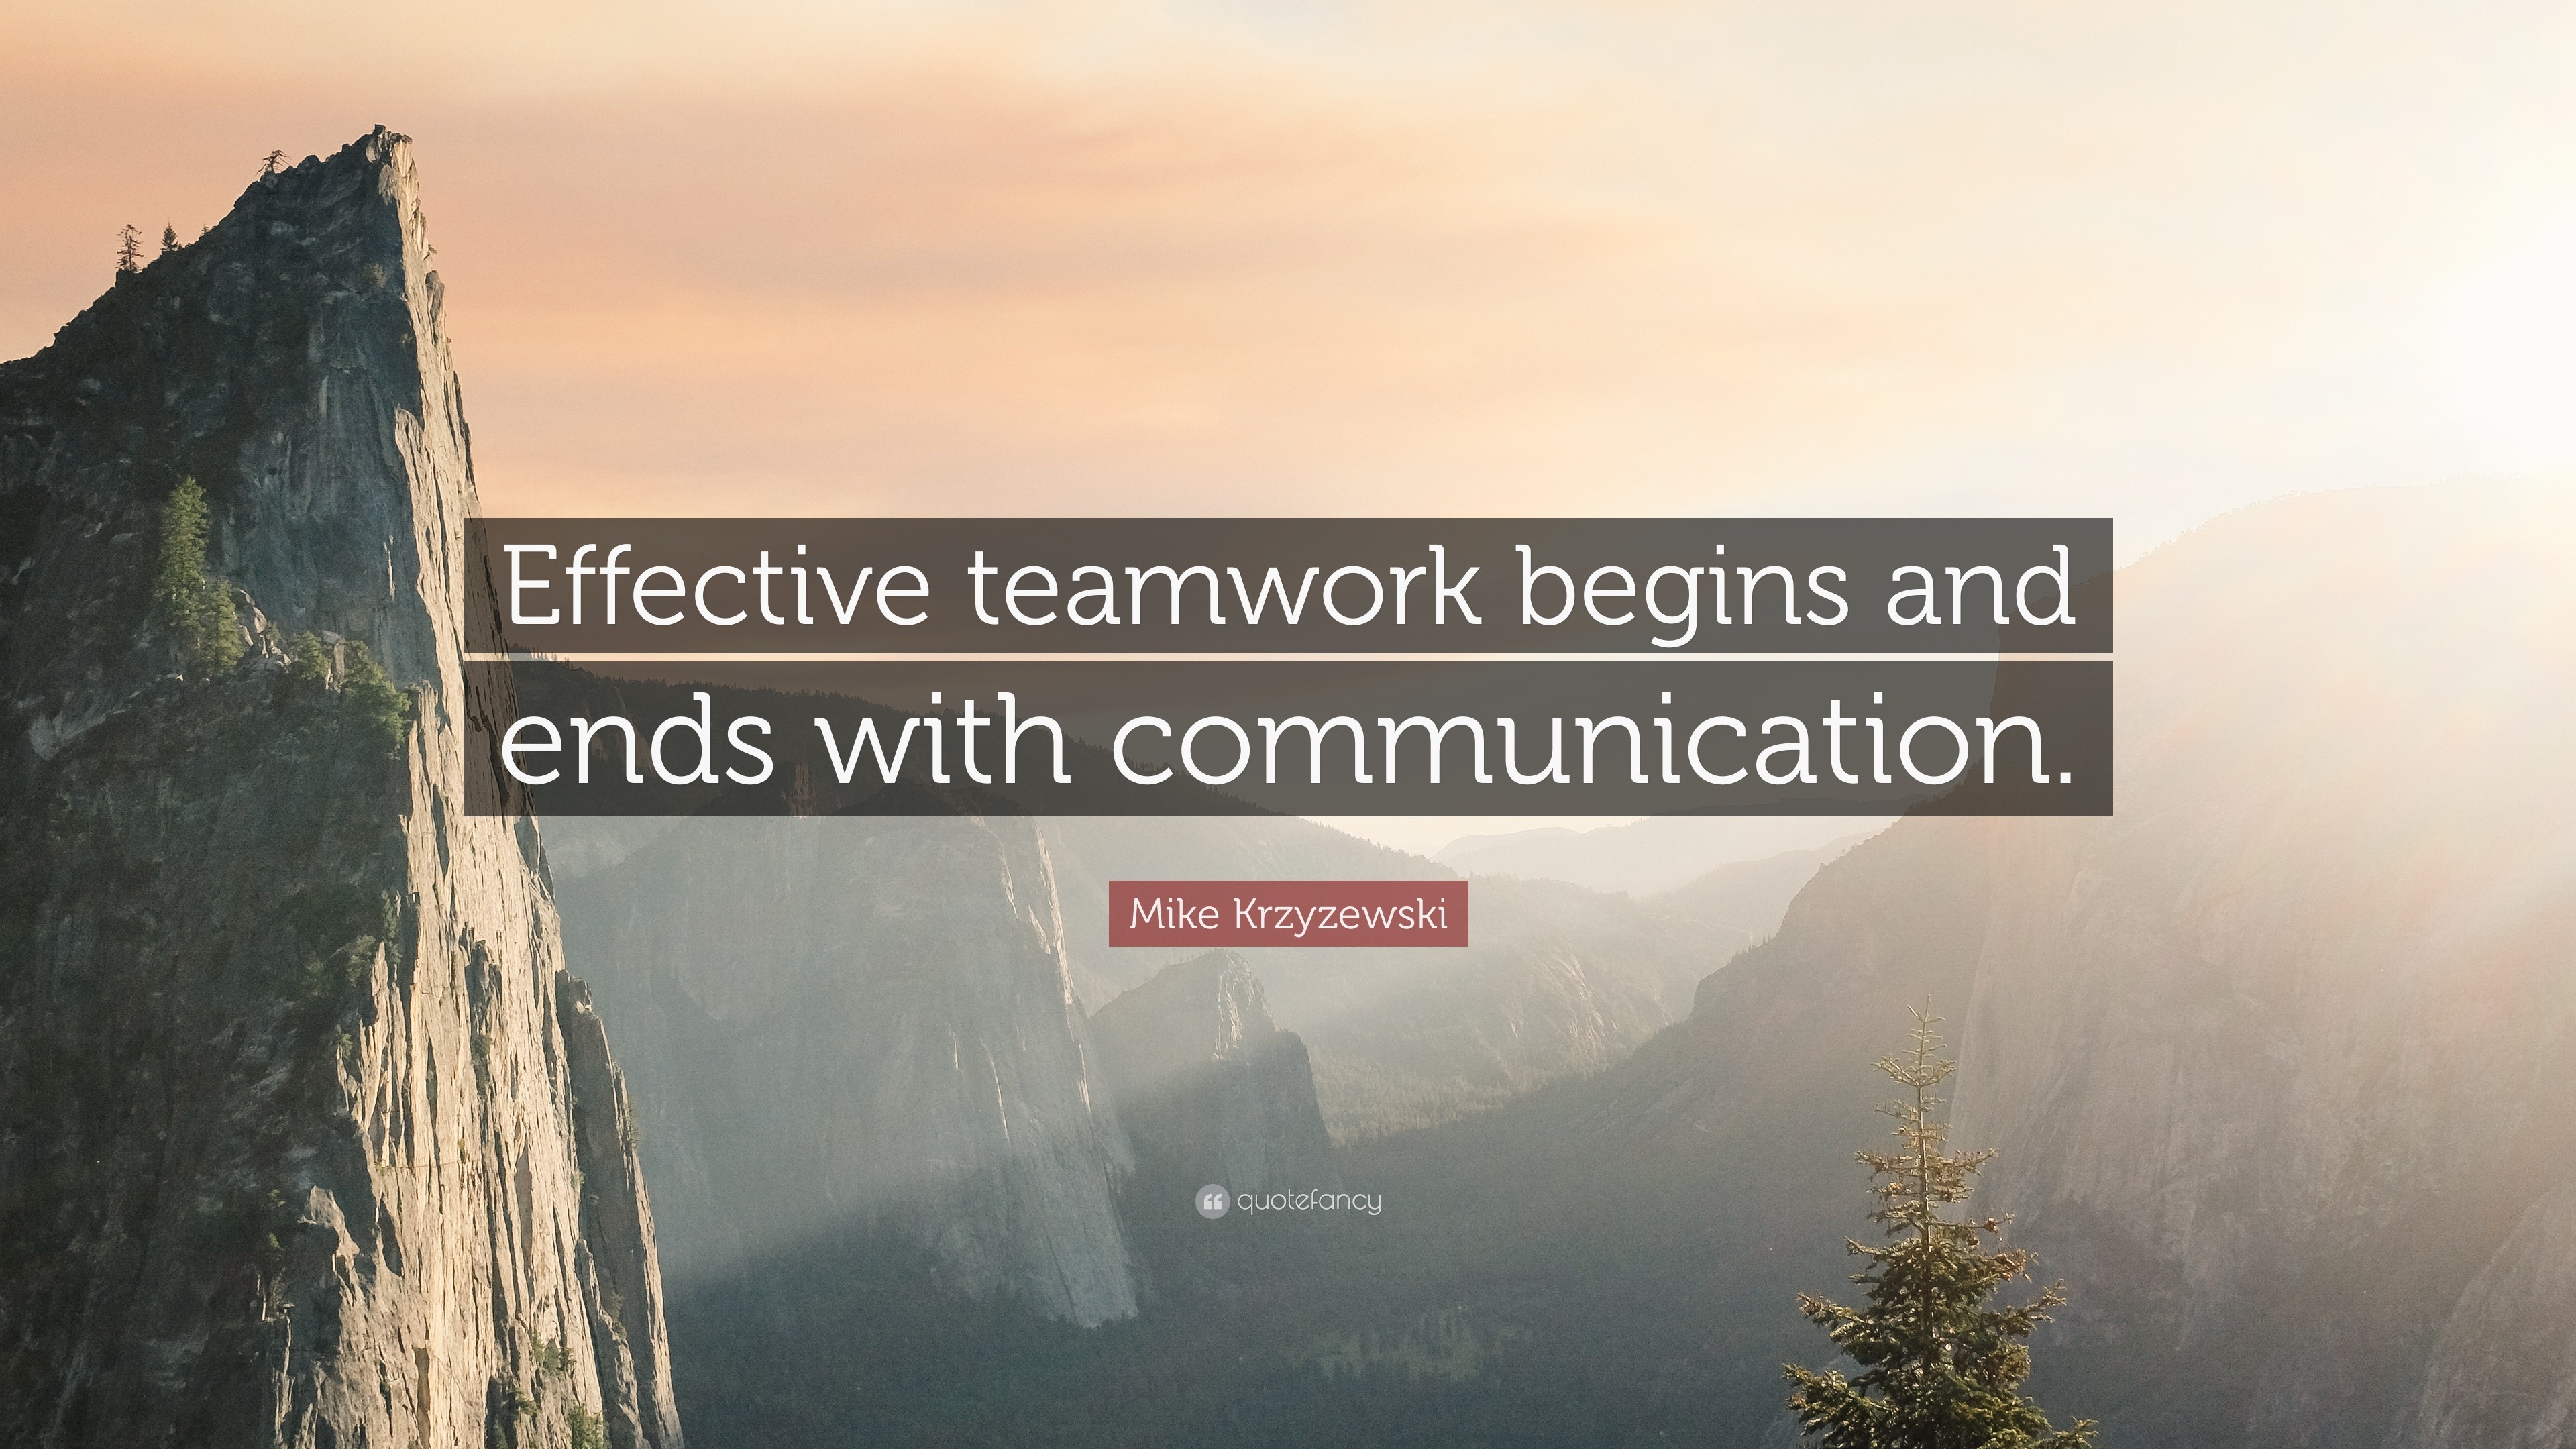 Communication Quotes (40 wallpapers) - Quotefancy